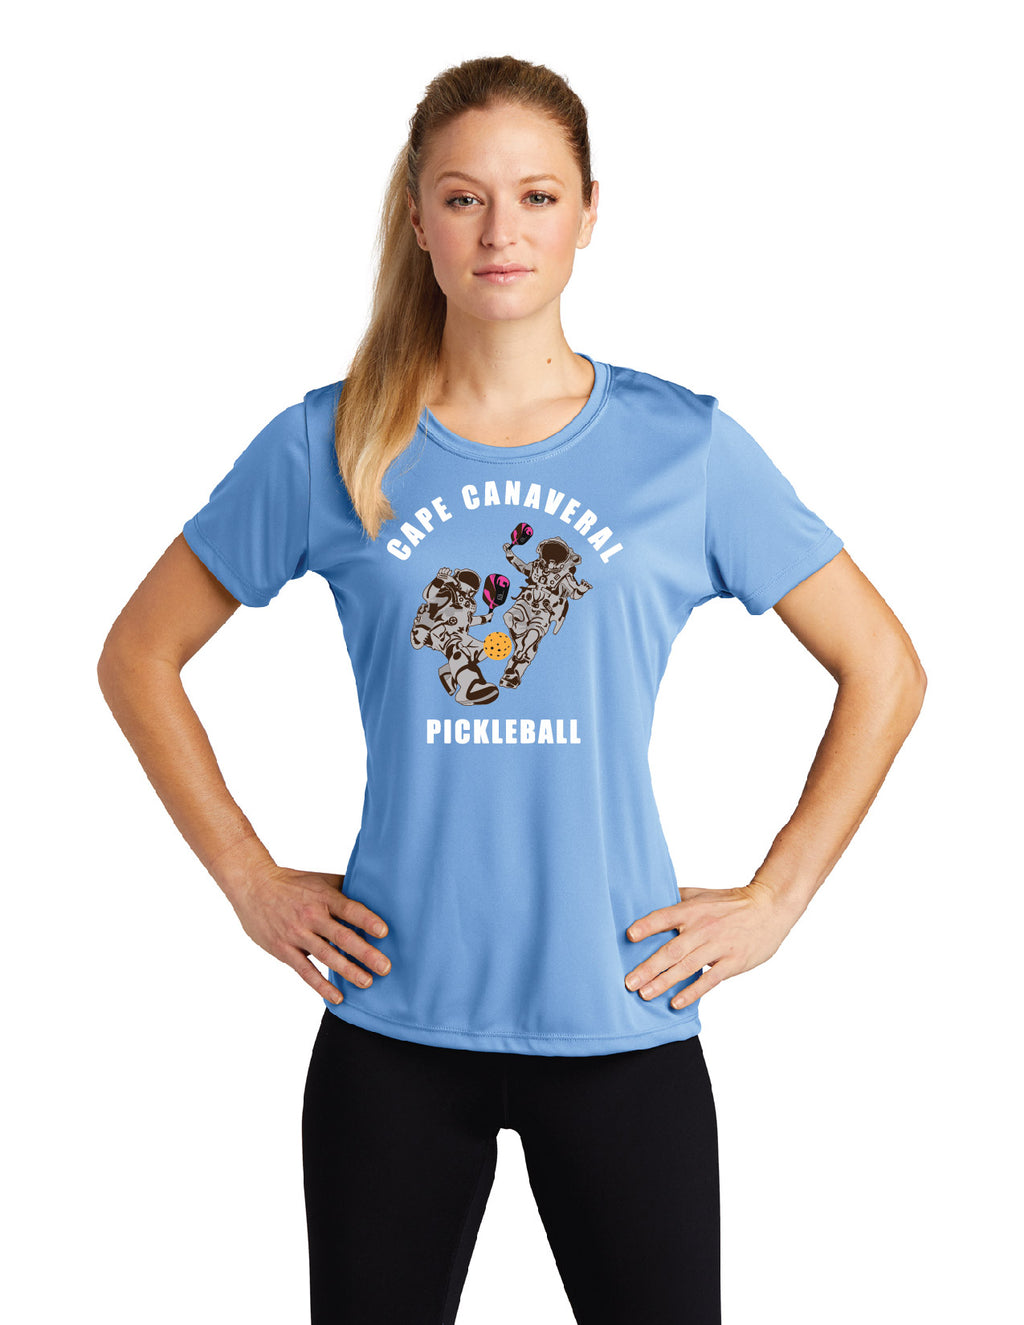 Women's Competitor Short Sleeve 'Cape Canaveral' Crew Neck Tee